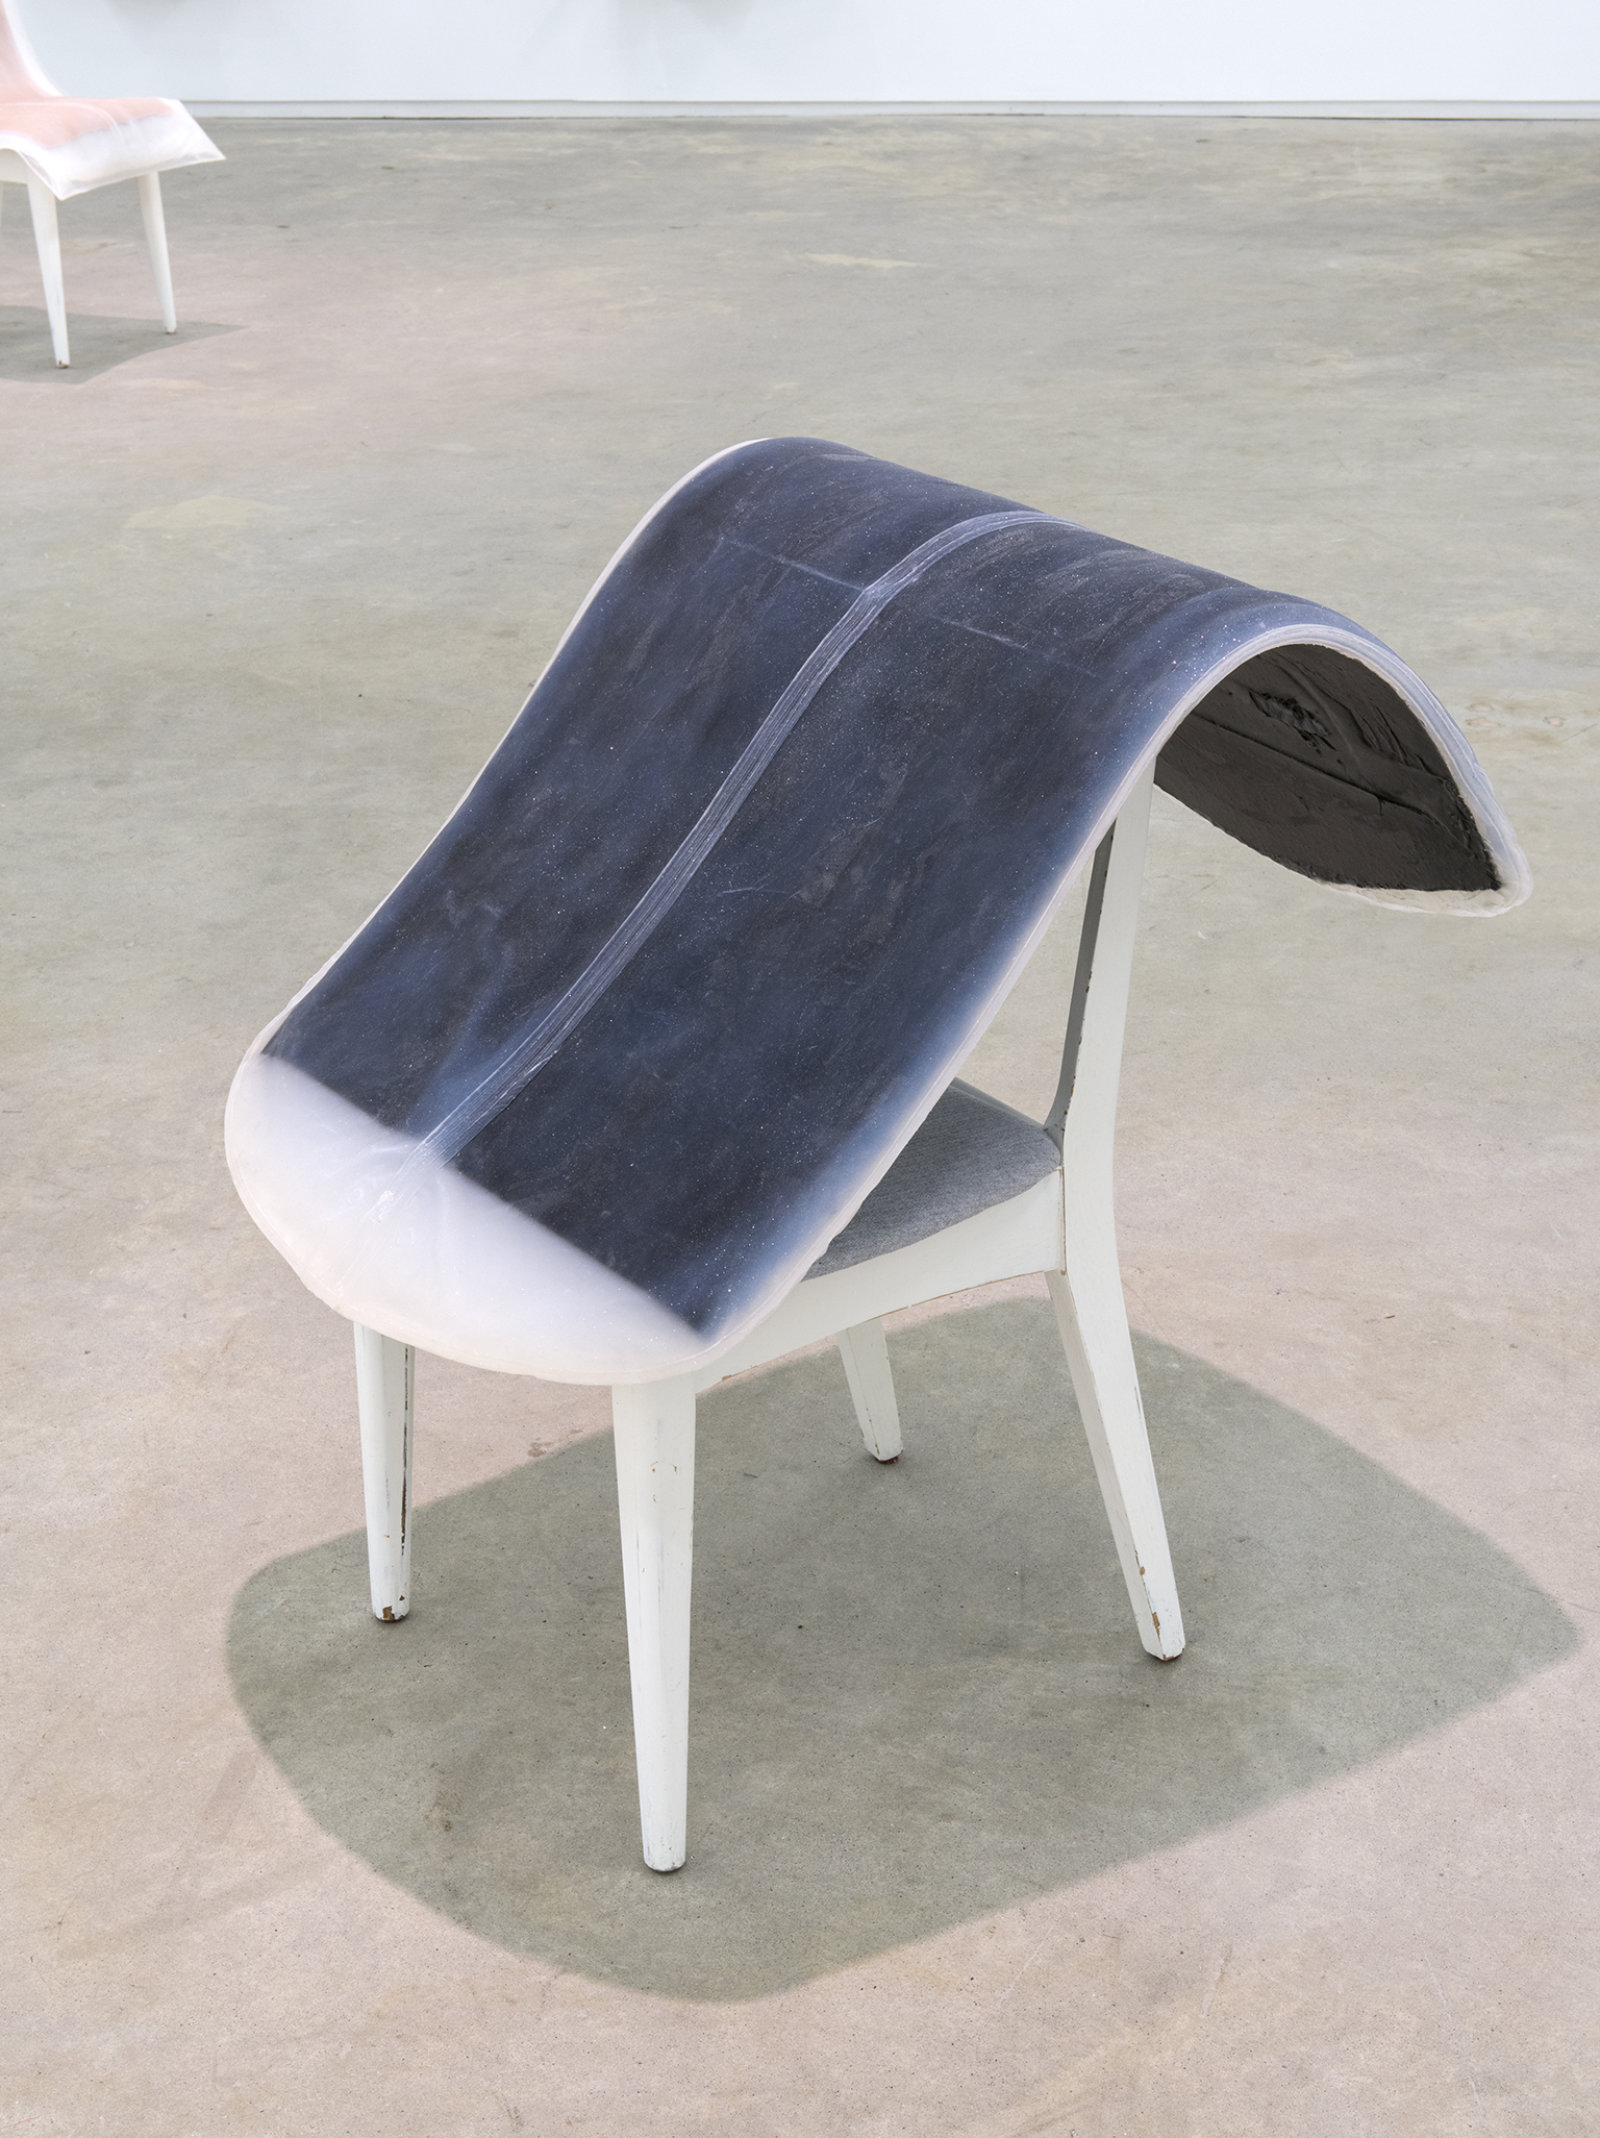 Liz Magor, Formal I, 2012, platinum-cure silicone rubber, chair, 32 x 24 x 32 in. (81 x 61 x 81 cm)